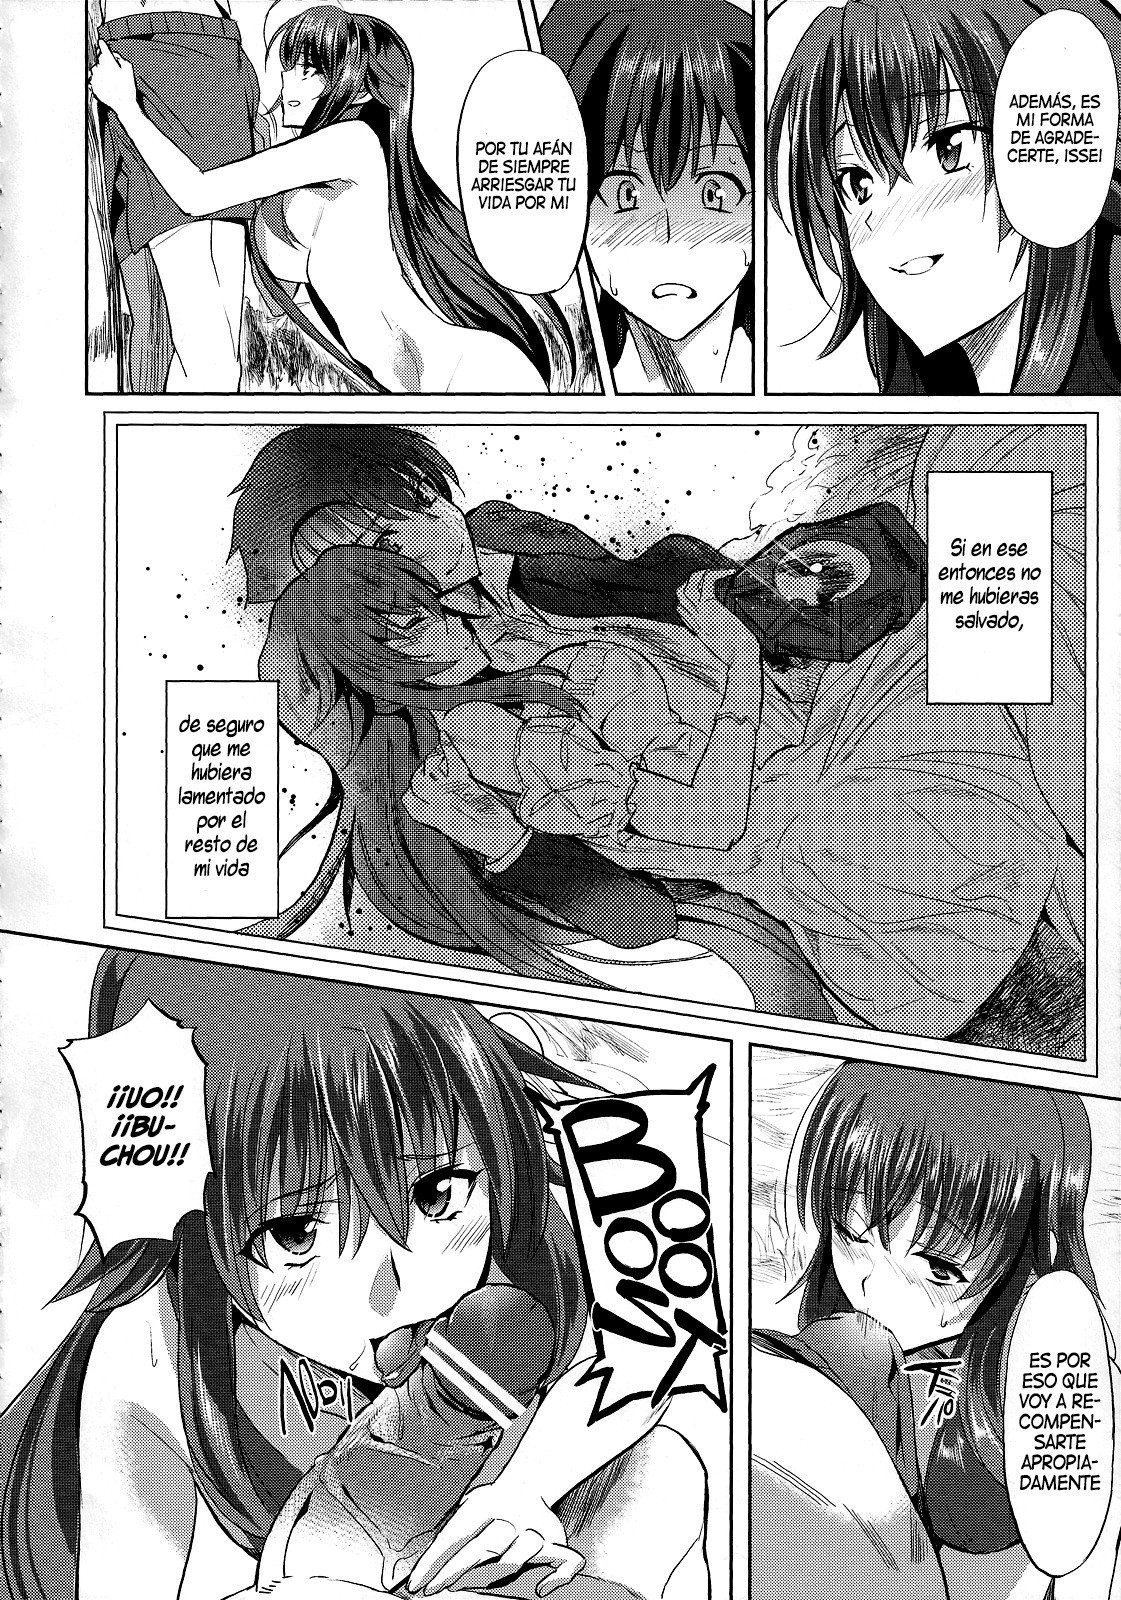 Rias to DxD (High School DxD) (C84) - 6